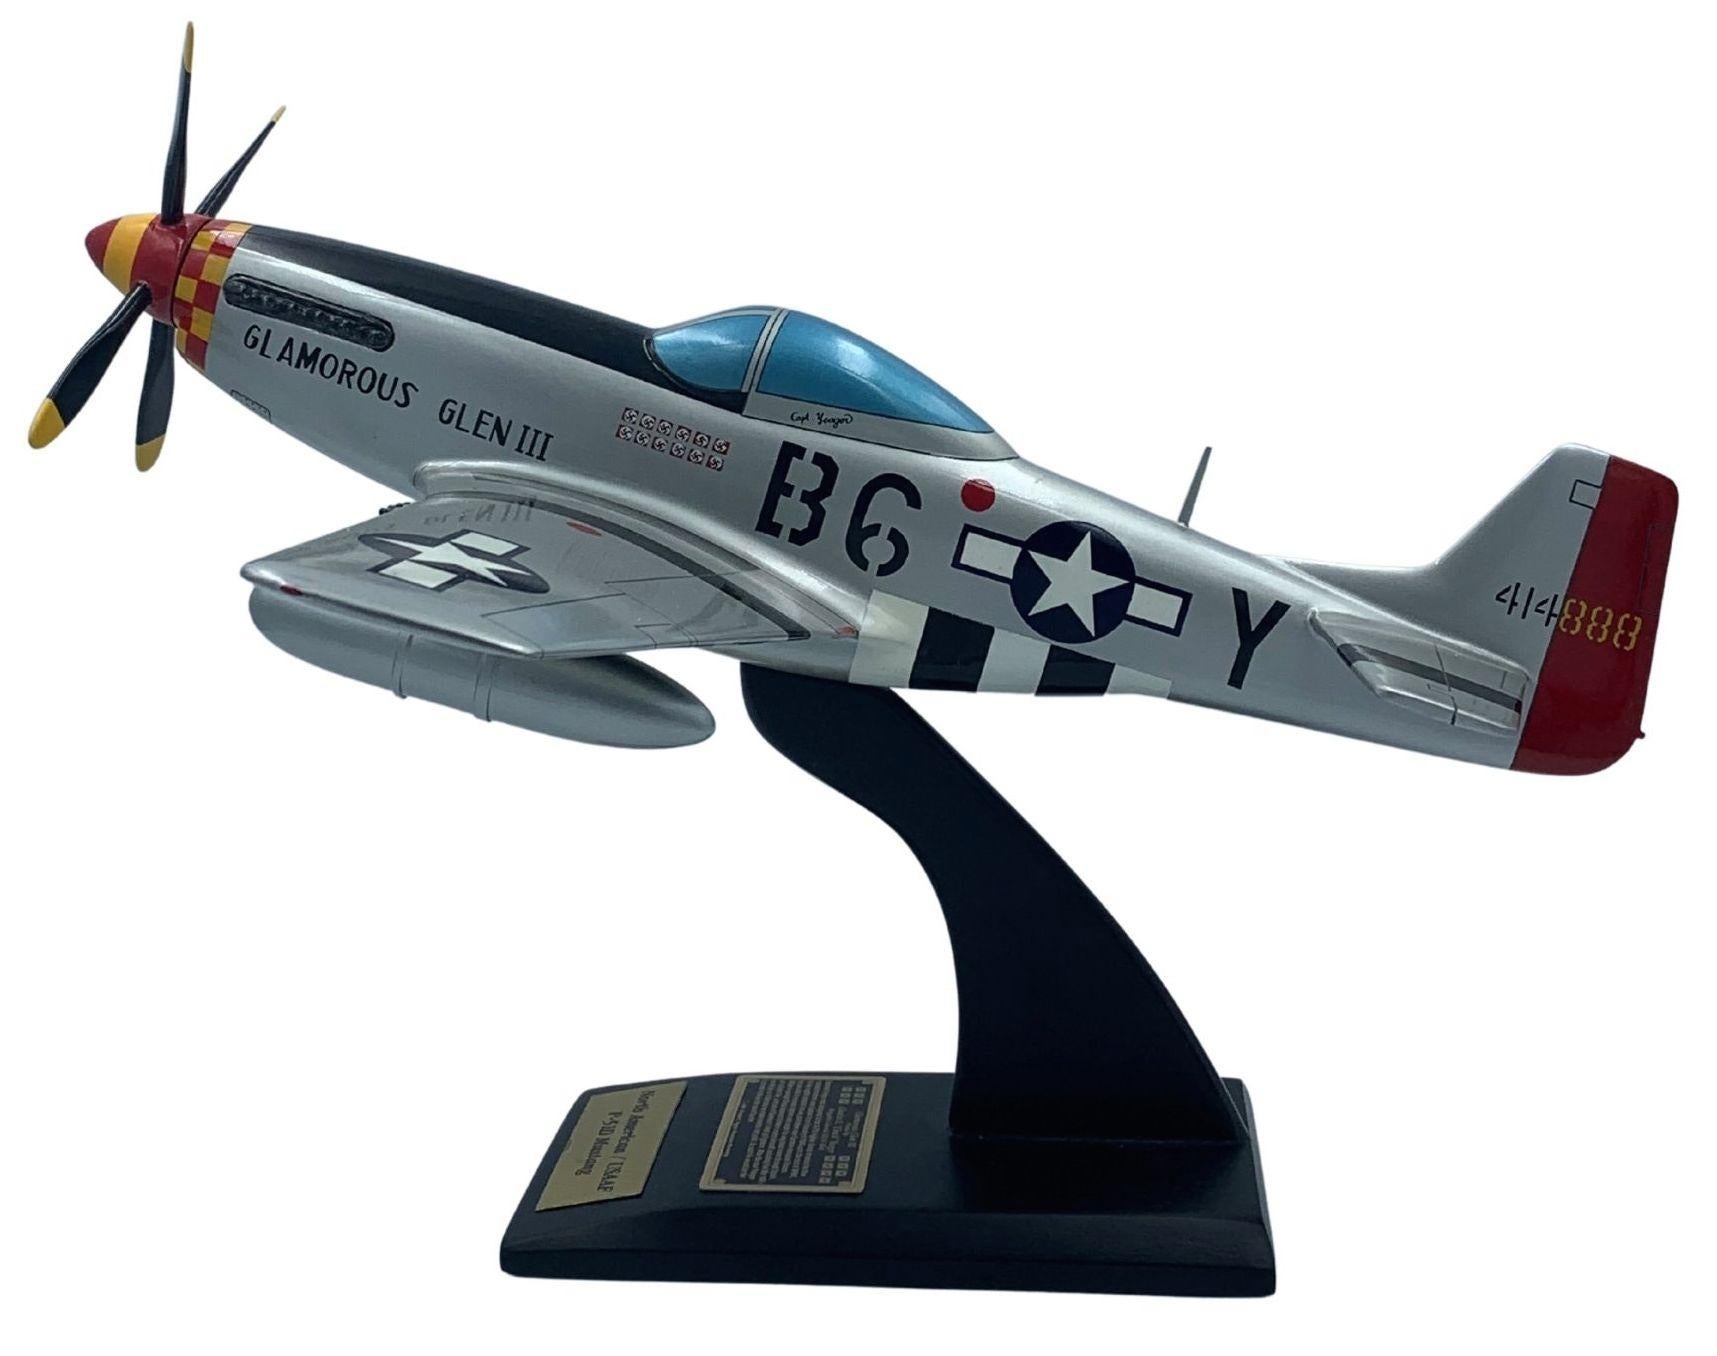 This is an American P-51D Mustang plane model signed by famous pilot Captain Charles E. Yeager. Yeager signed the plane on the wing of this plane model in black marker.

The American P-51D, also called P-51D Mustang, was a single-seat,